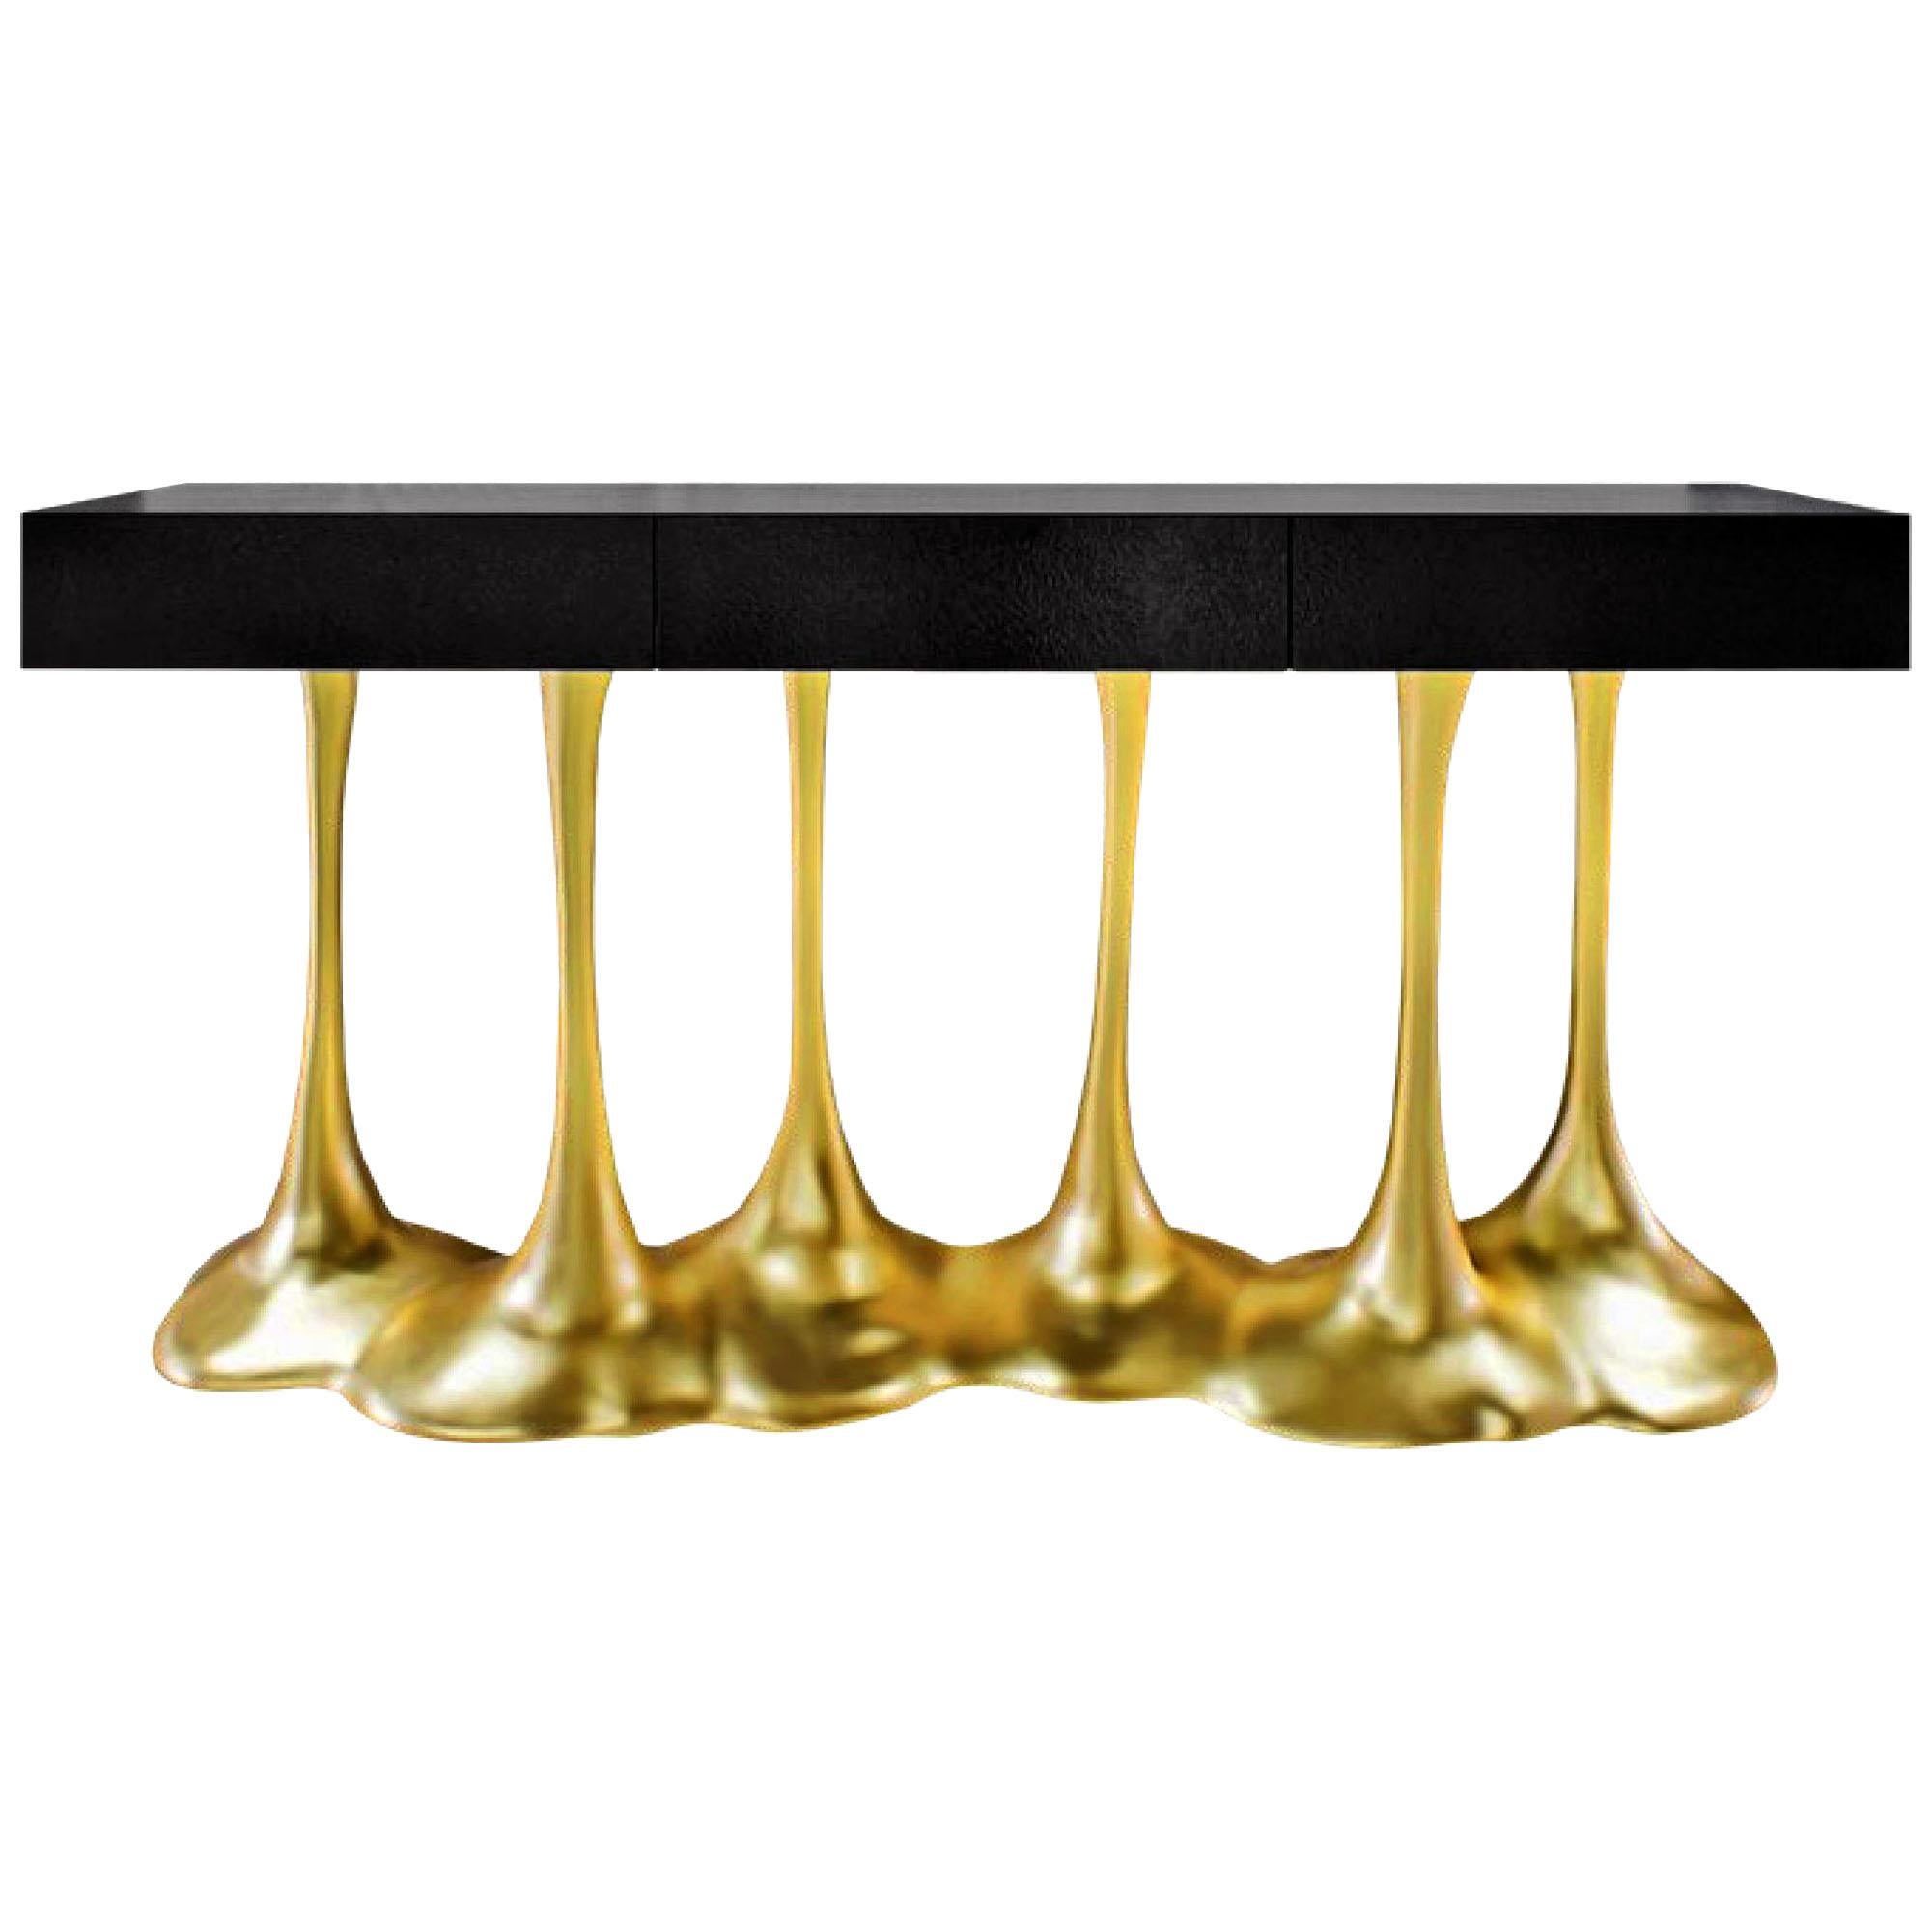 Sculptural And Luxurious Argos Futuristic Console Table In Black